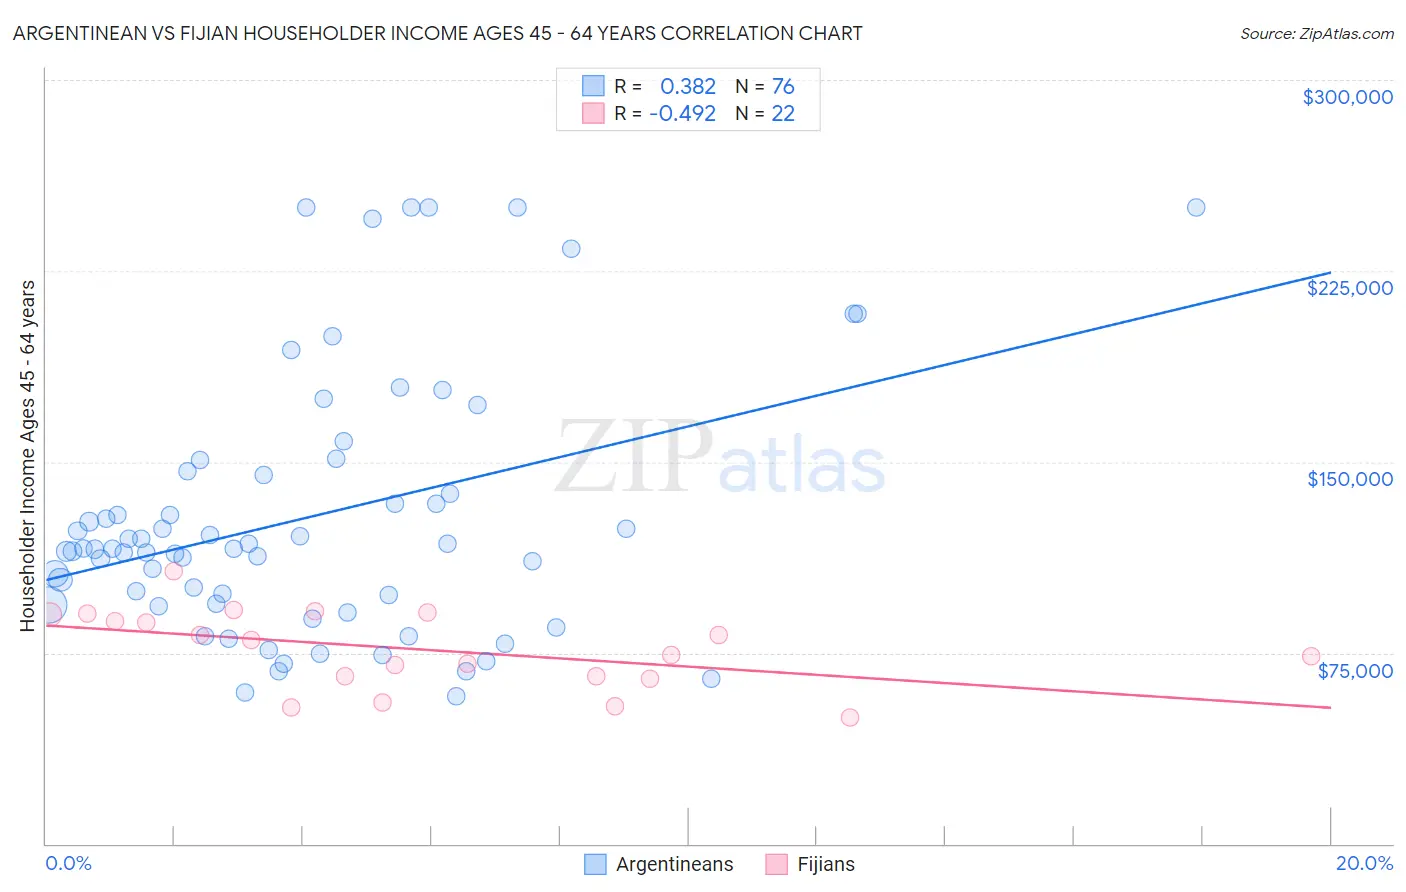 Argentinean vs Fijian Householder Income Ages 45 - 64 years